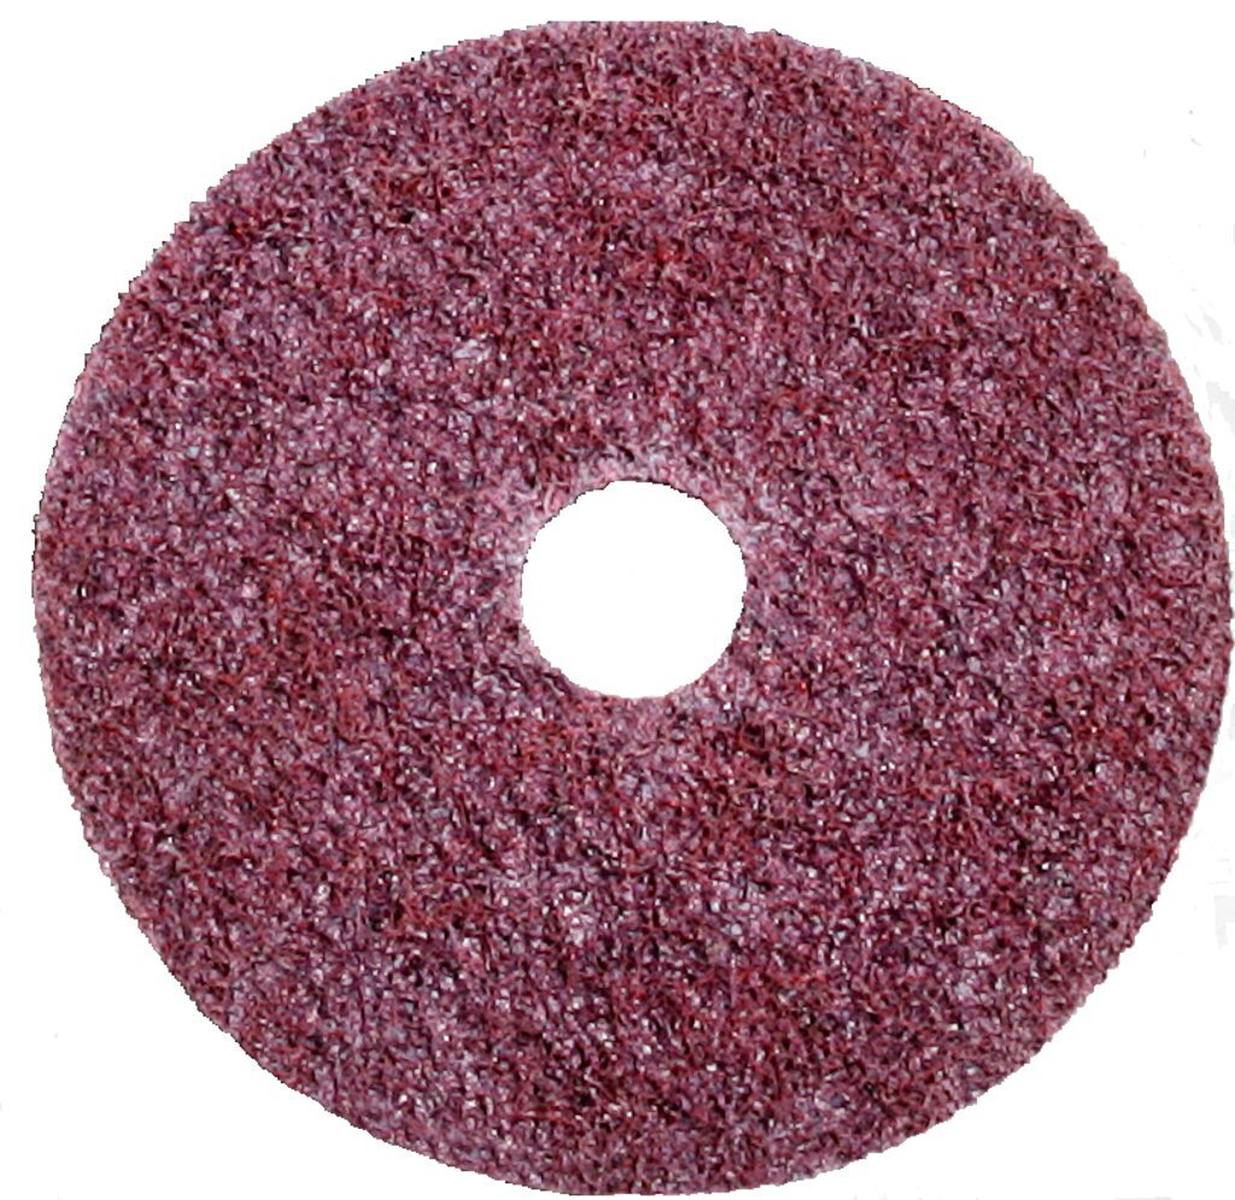 3M Scotch-Brite Non-woven disc GB-DH with centring, red-brown, 125 mm x 22 mm, coarse heavy duty